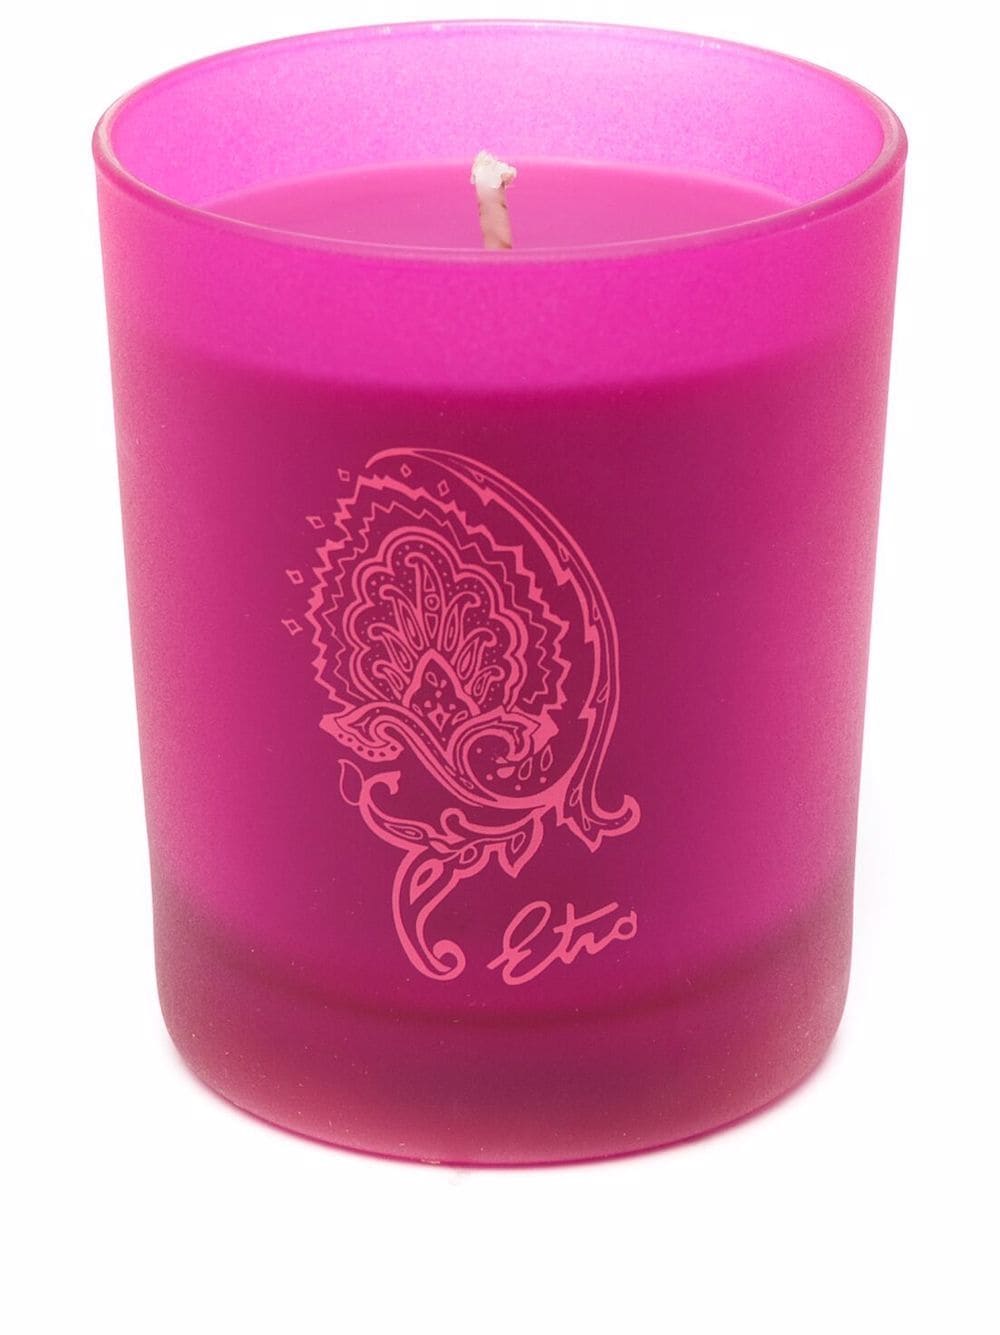 Afrodite Candle